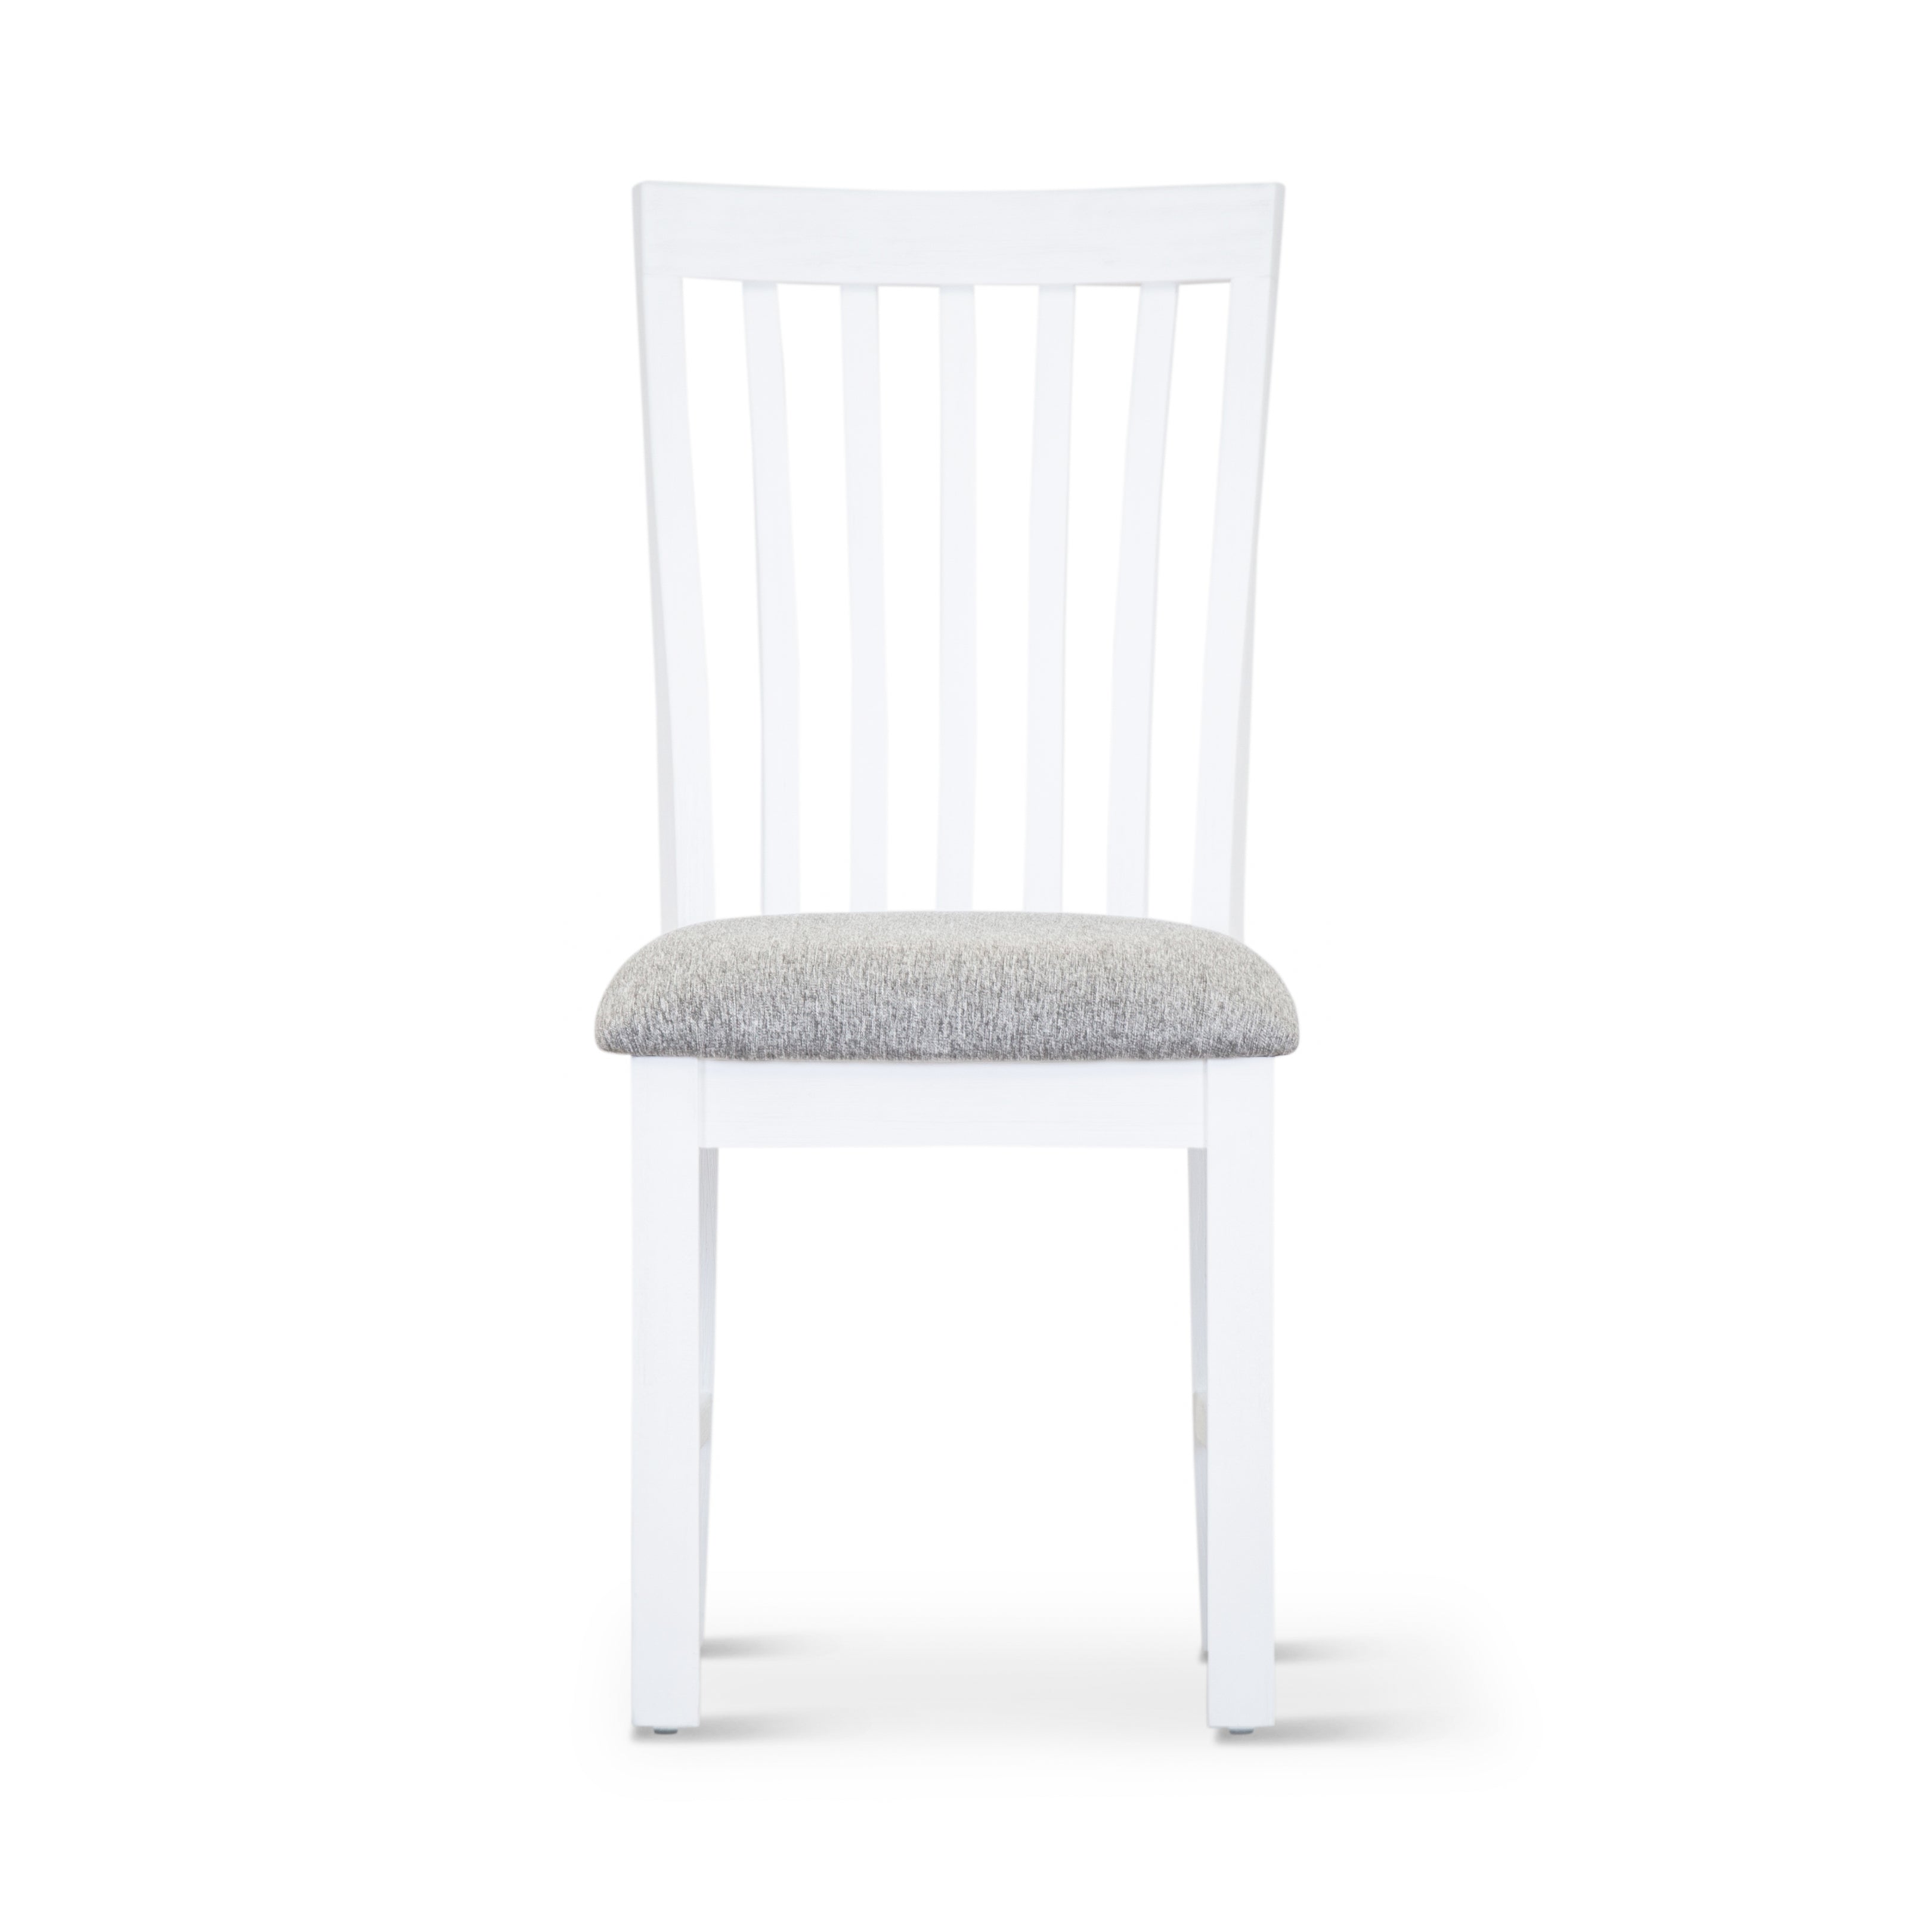 Laelia Dining Chair Set of 2 Solid Acacia Timber Wood Coastal Furniture - White Deals499